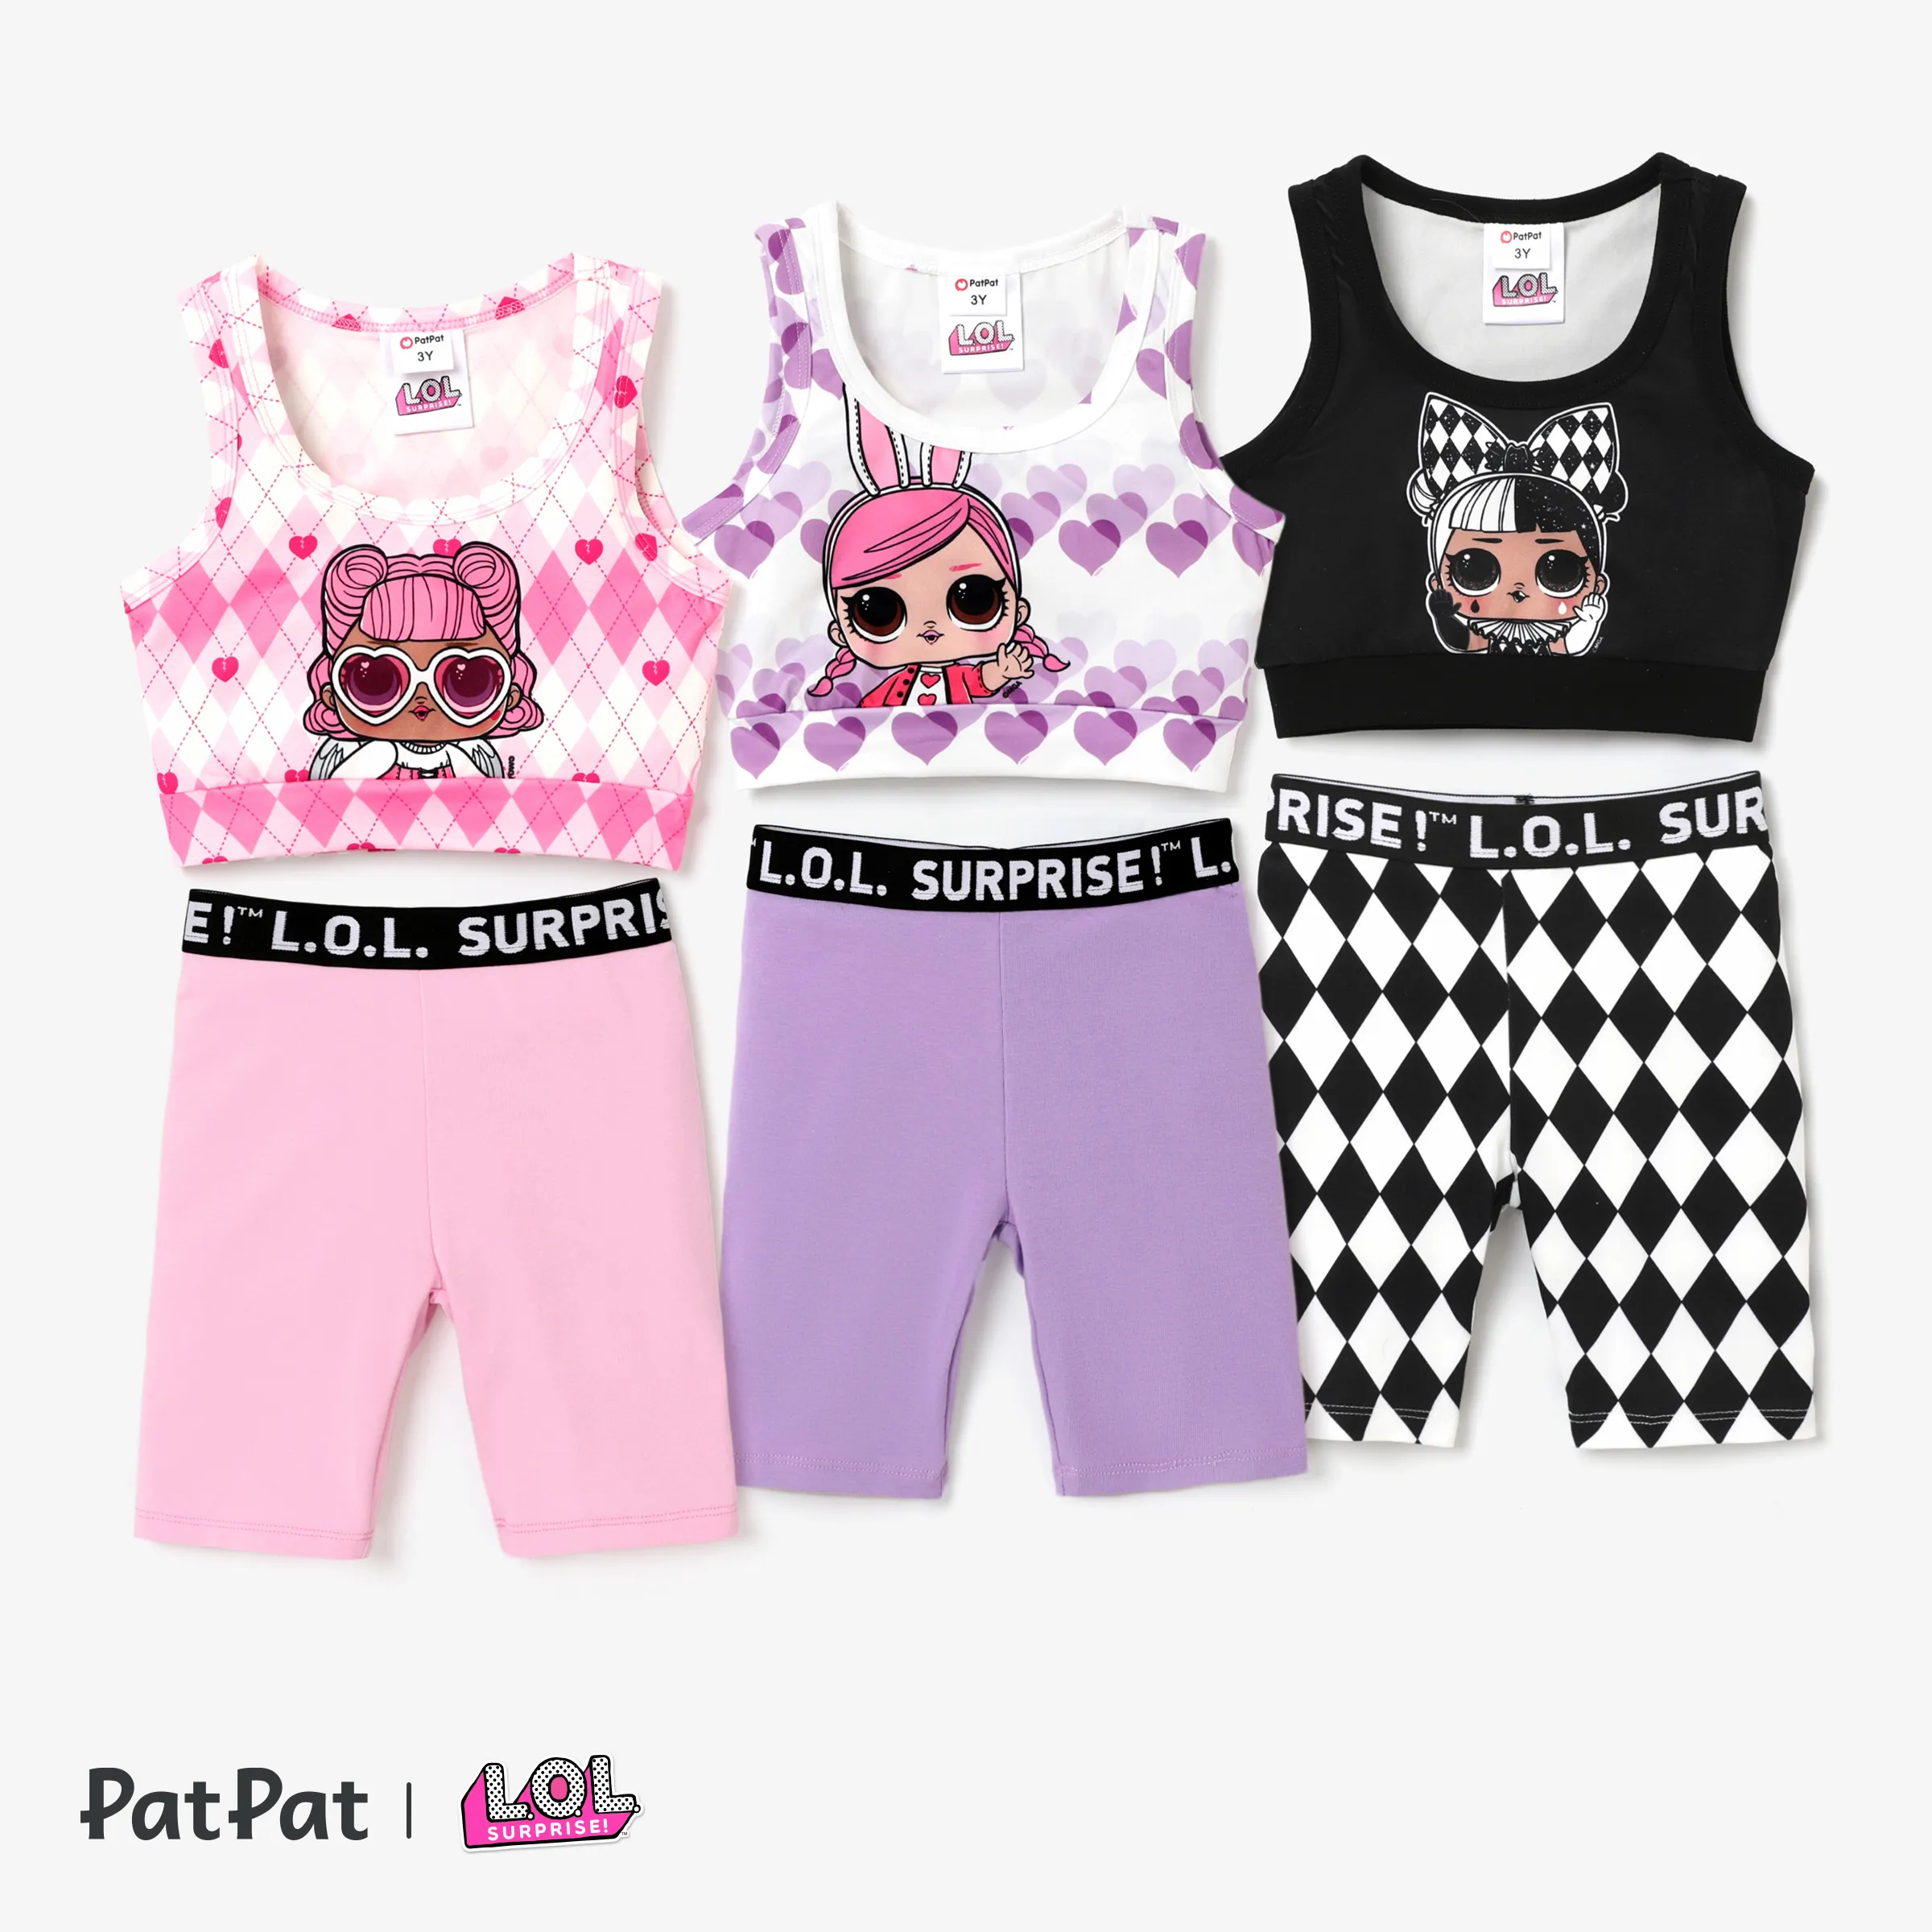 L.O.L. SURPRISE! Toddler Girl Graphic Print Cropped Top And Tight Cycling Pants Set